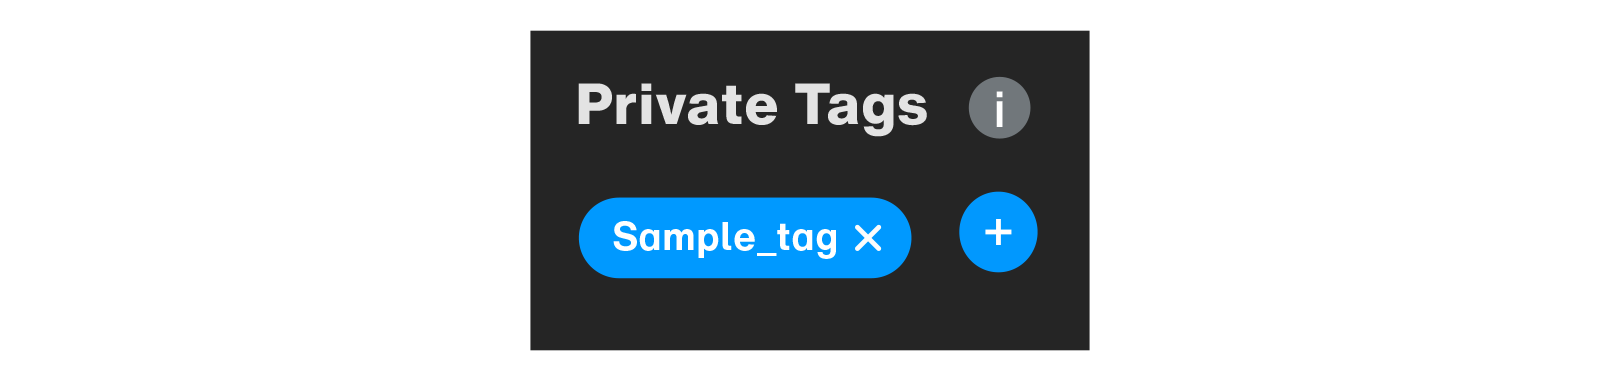 Removing tags_01